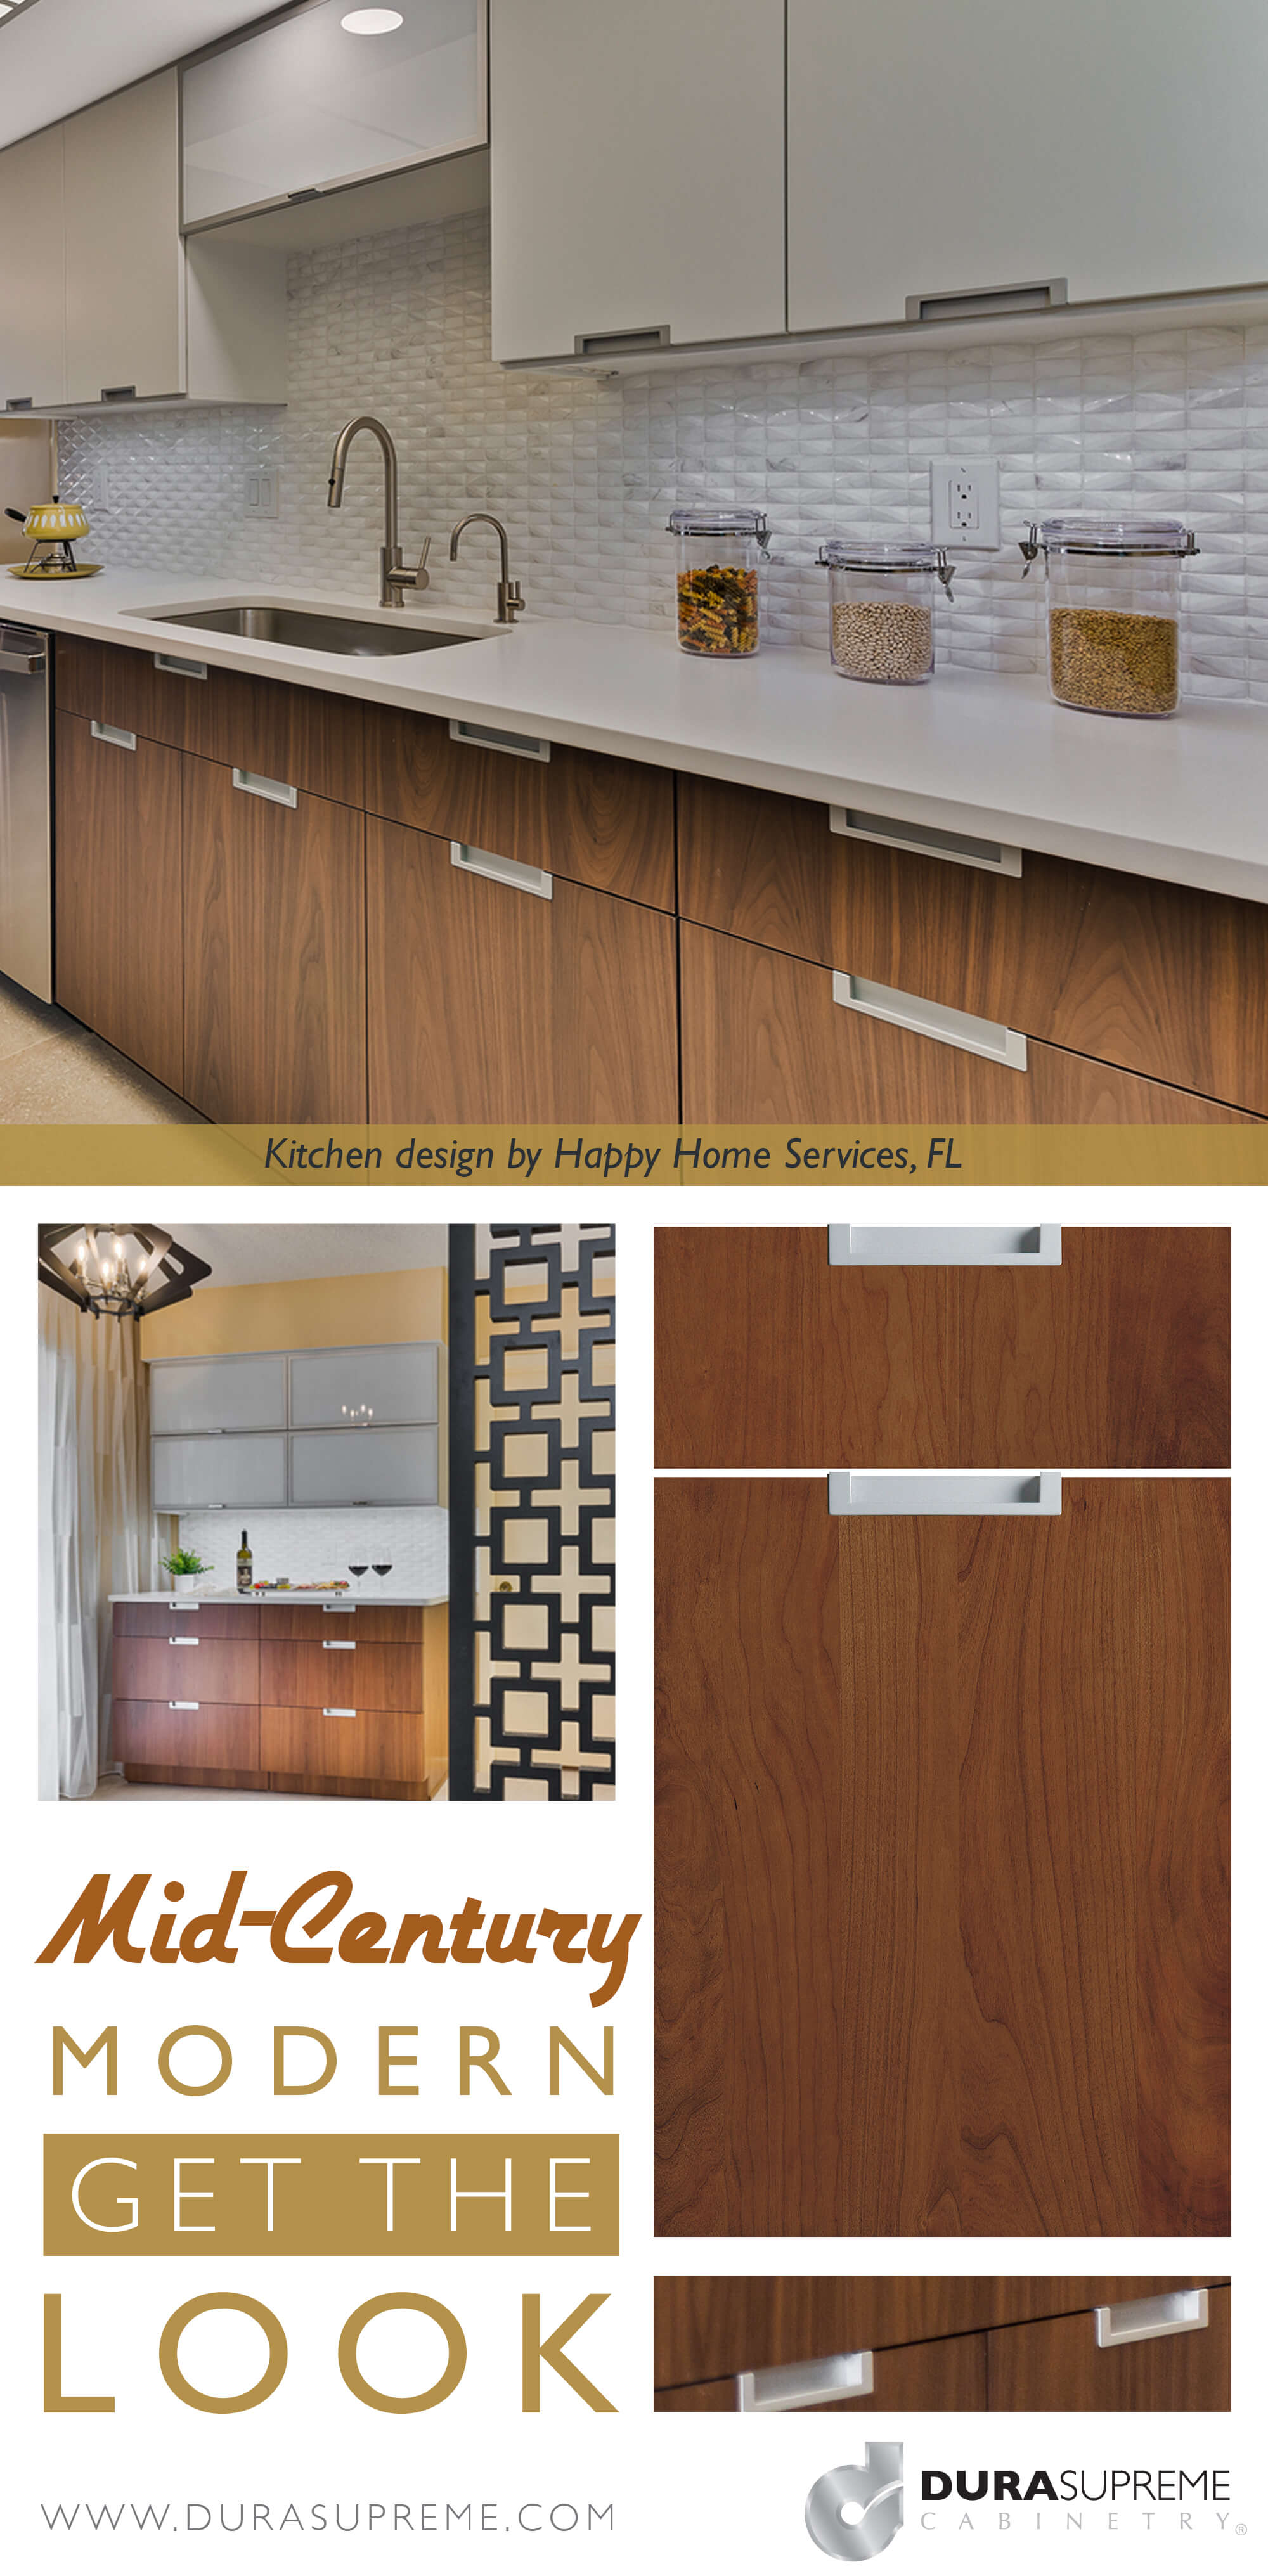 Get the look! Mid-Century Modern Style. Learn how to design a Mid-century Modern kitchen.